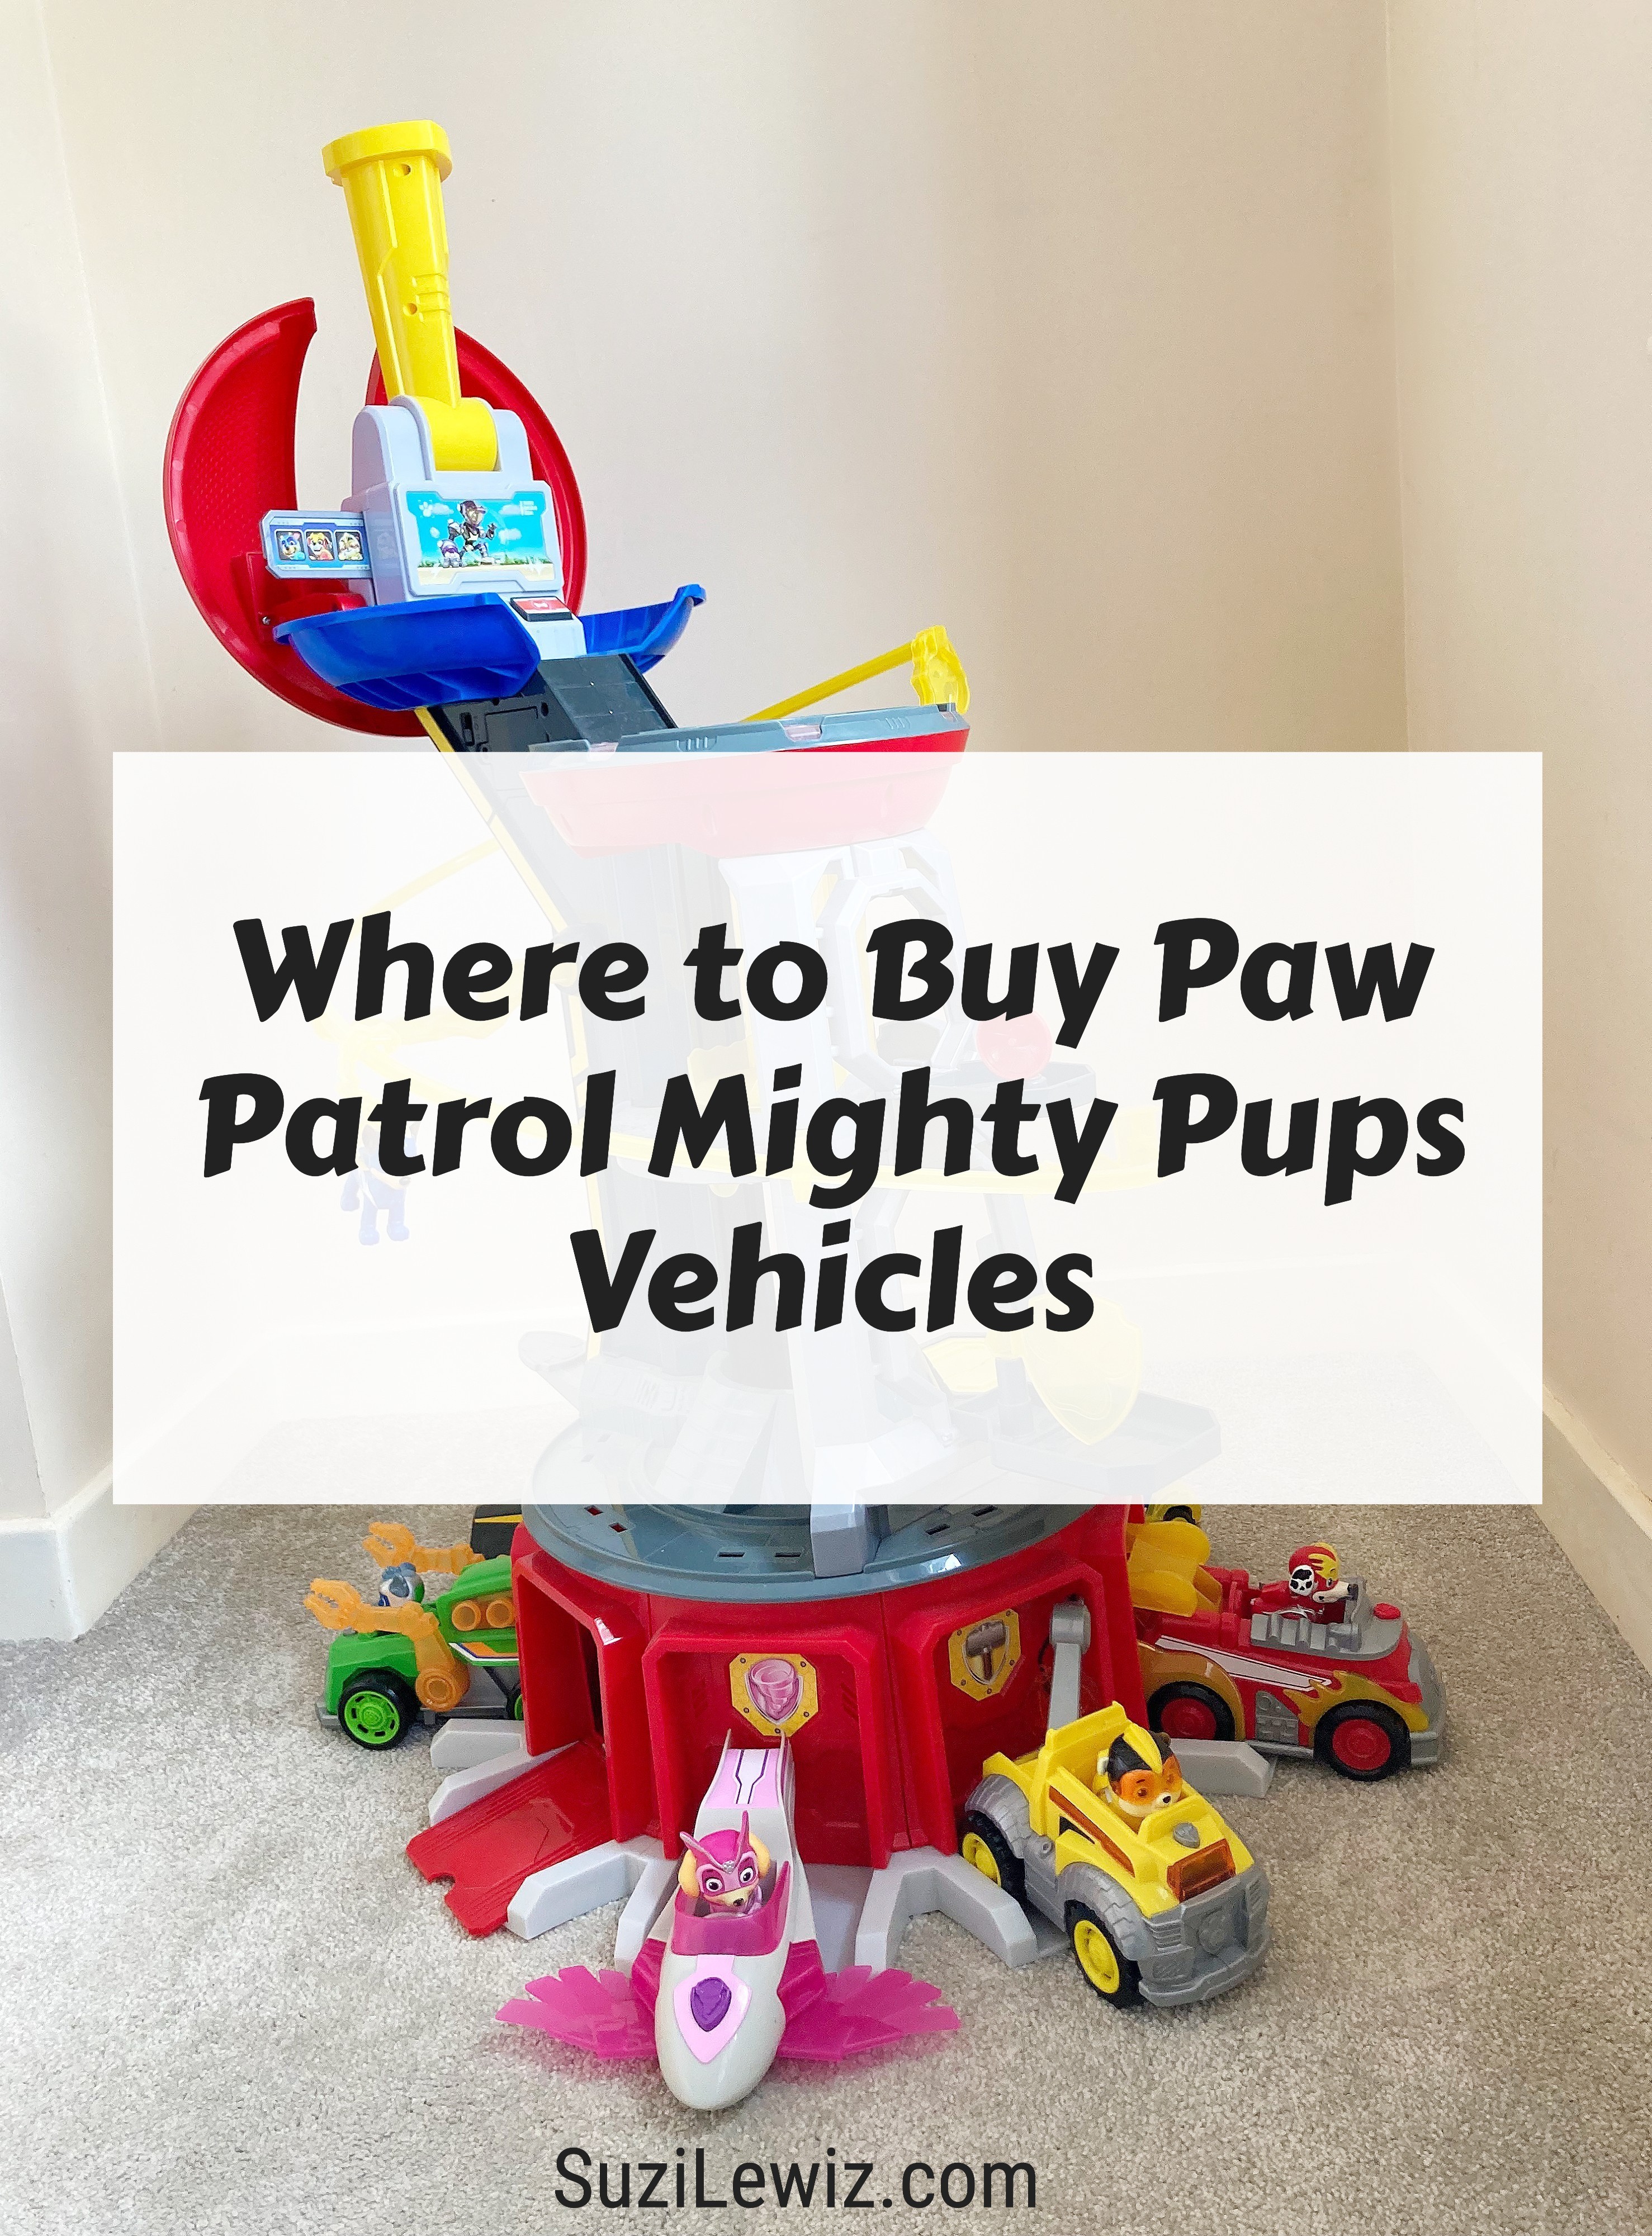 New Paw Patrol Mighty Pups Vehicles & Lookout Tower 2023 - Suzi Lewiz